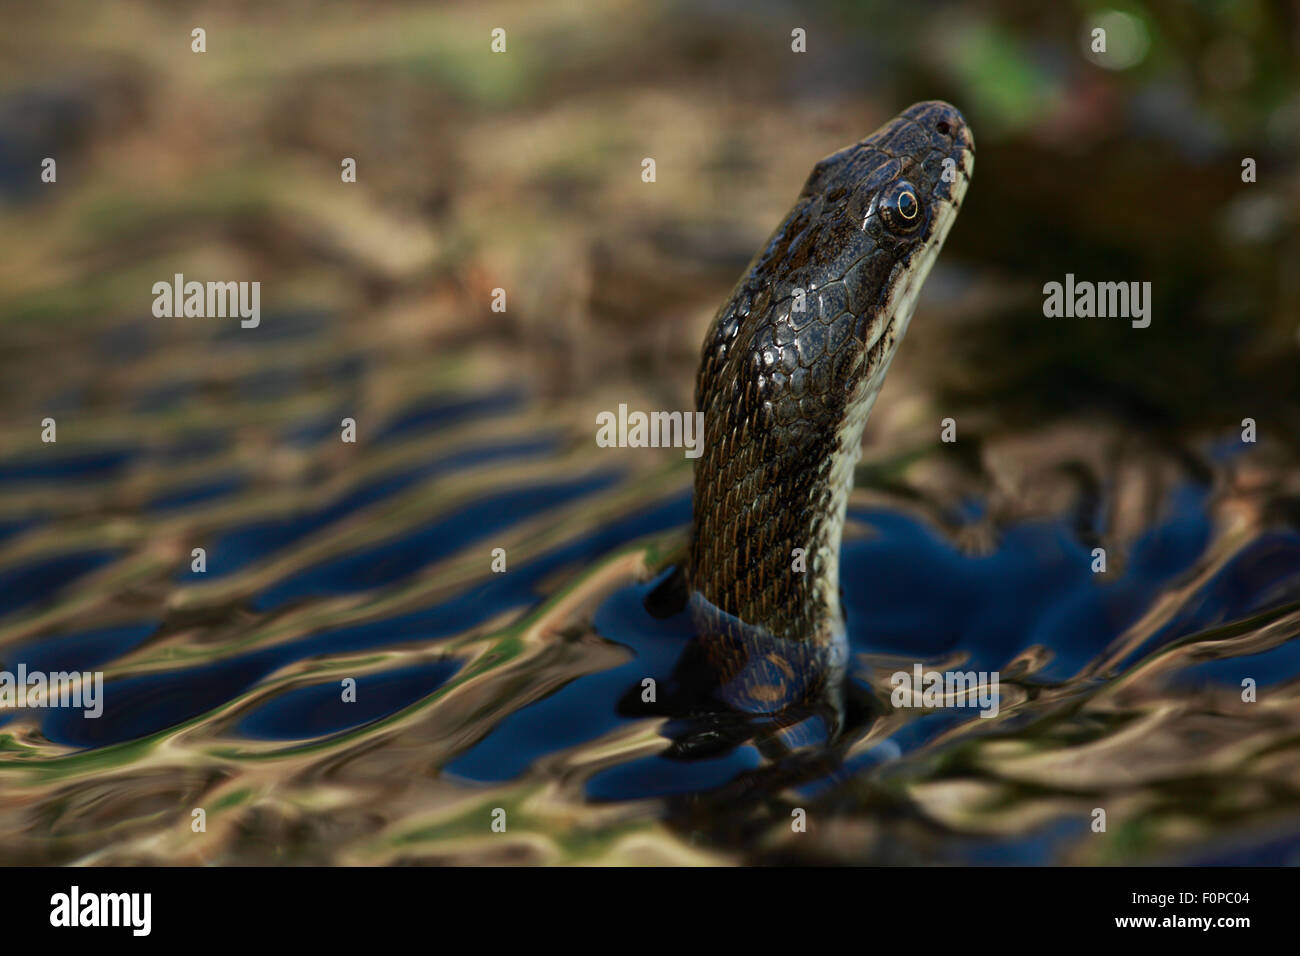 Dice snake (Natrix tesselata) hunting for small fish and tadpoles in a lake, Patras area, The Peloponnese, Greece, May 2009 Stock Photo